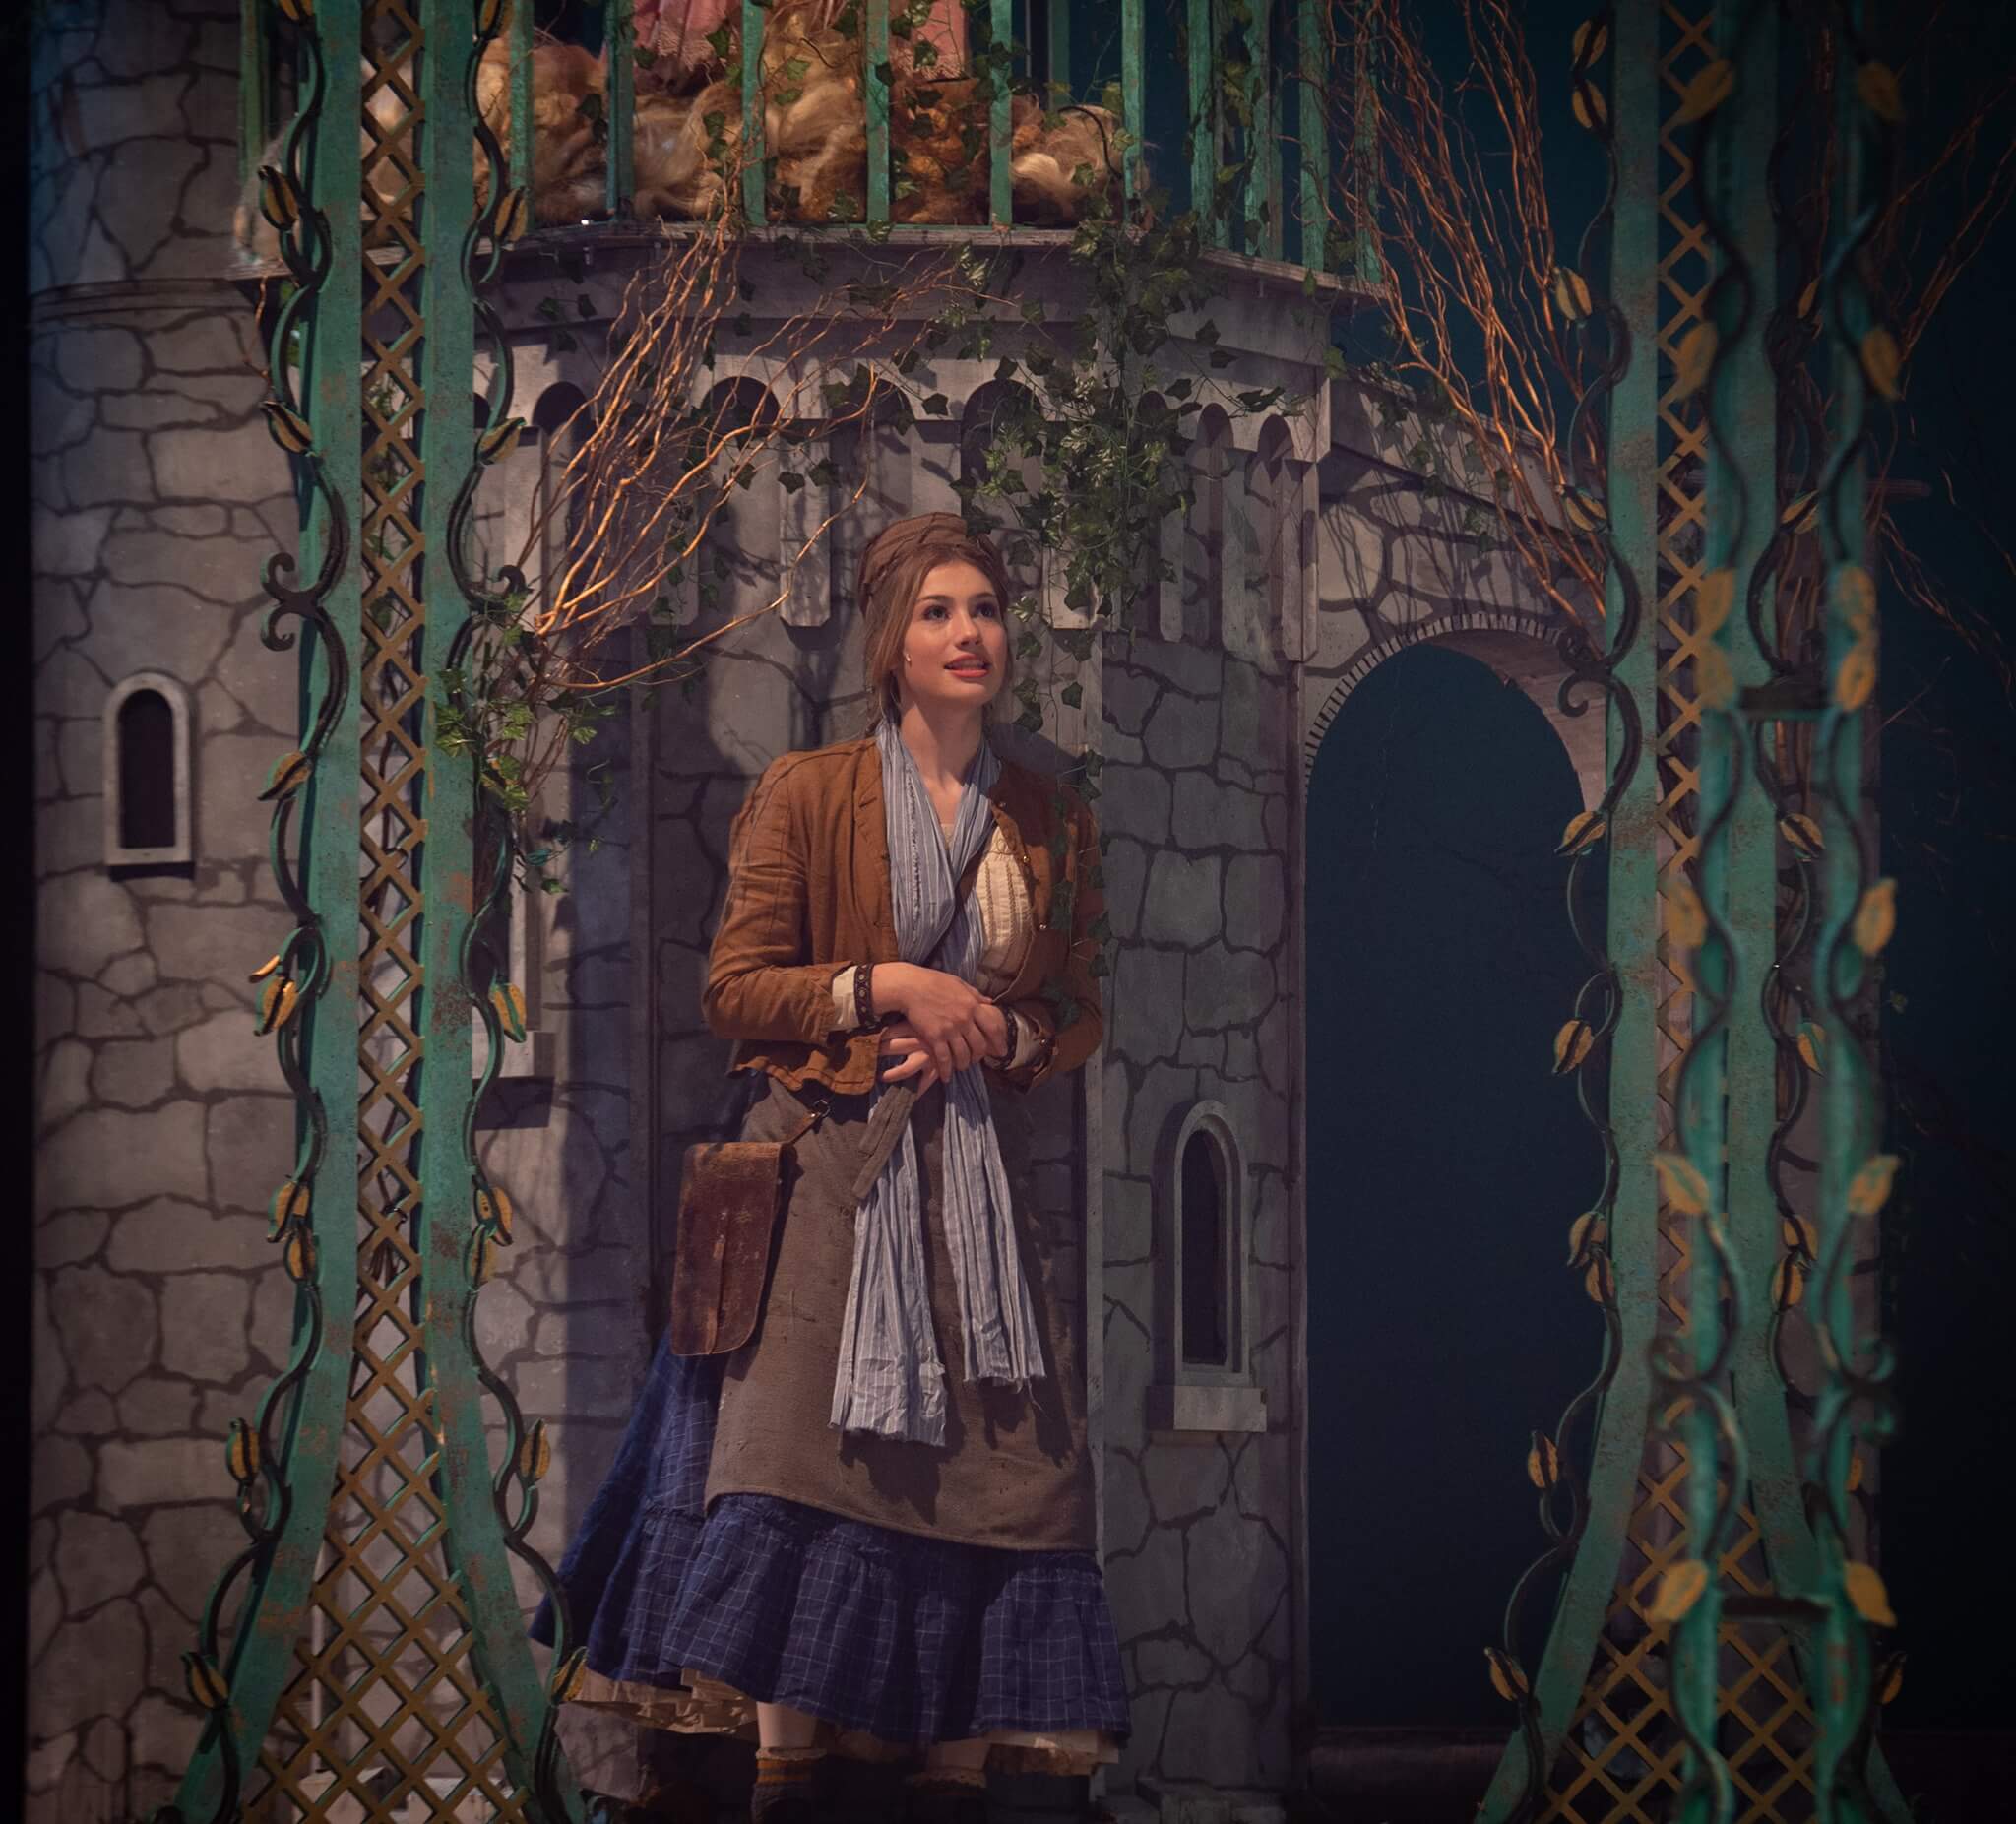 Into the Woods Set Rental pictures - Stagecraft Theatrical